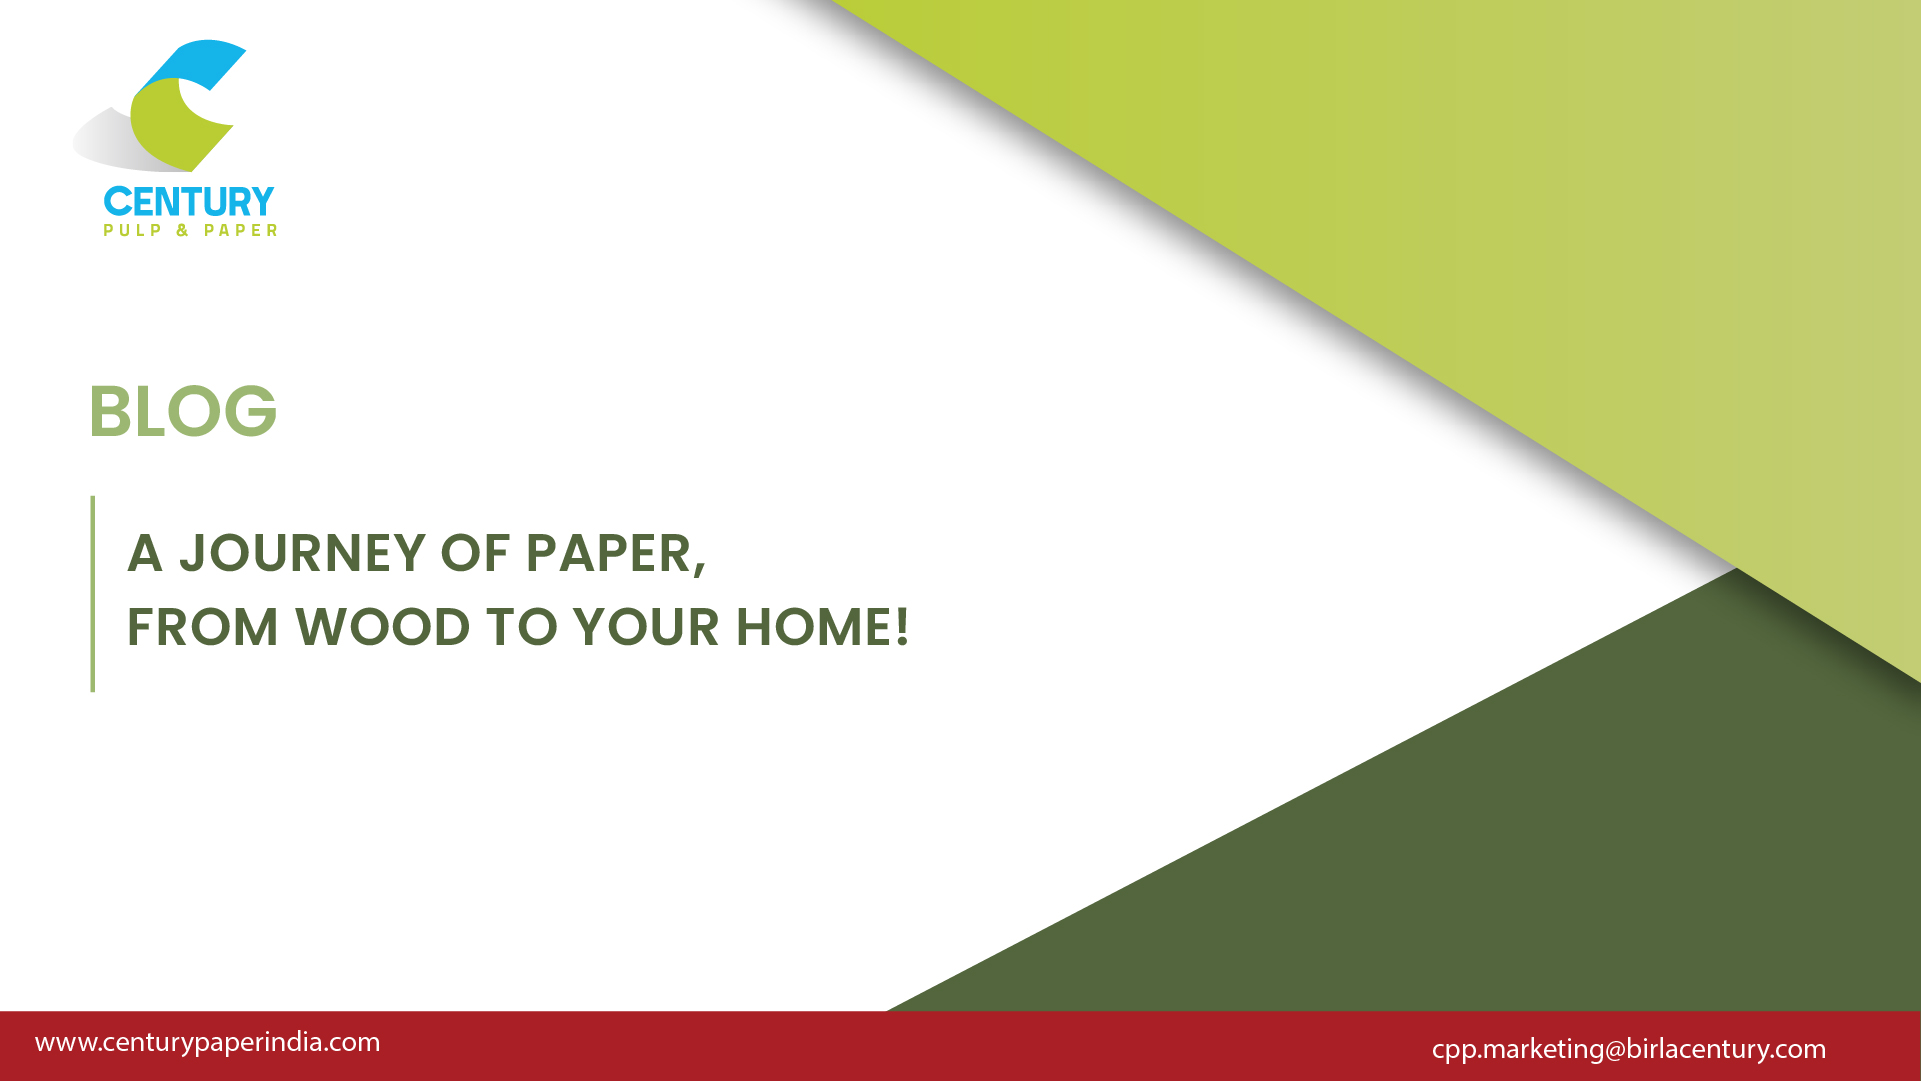 A journey of paper, from wood to your home!